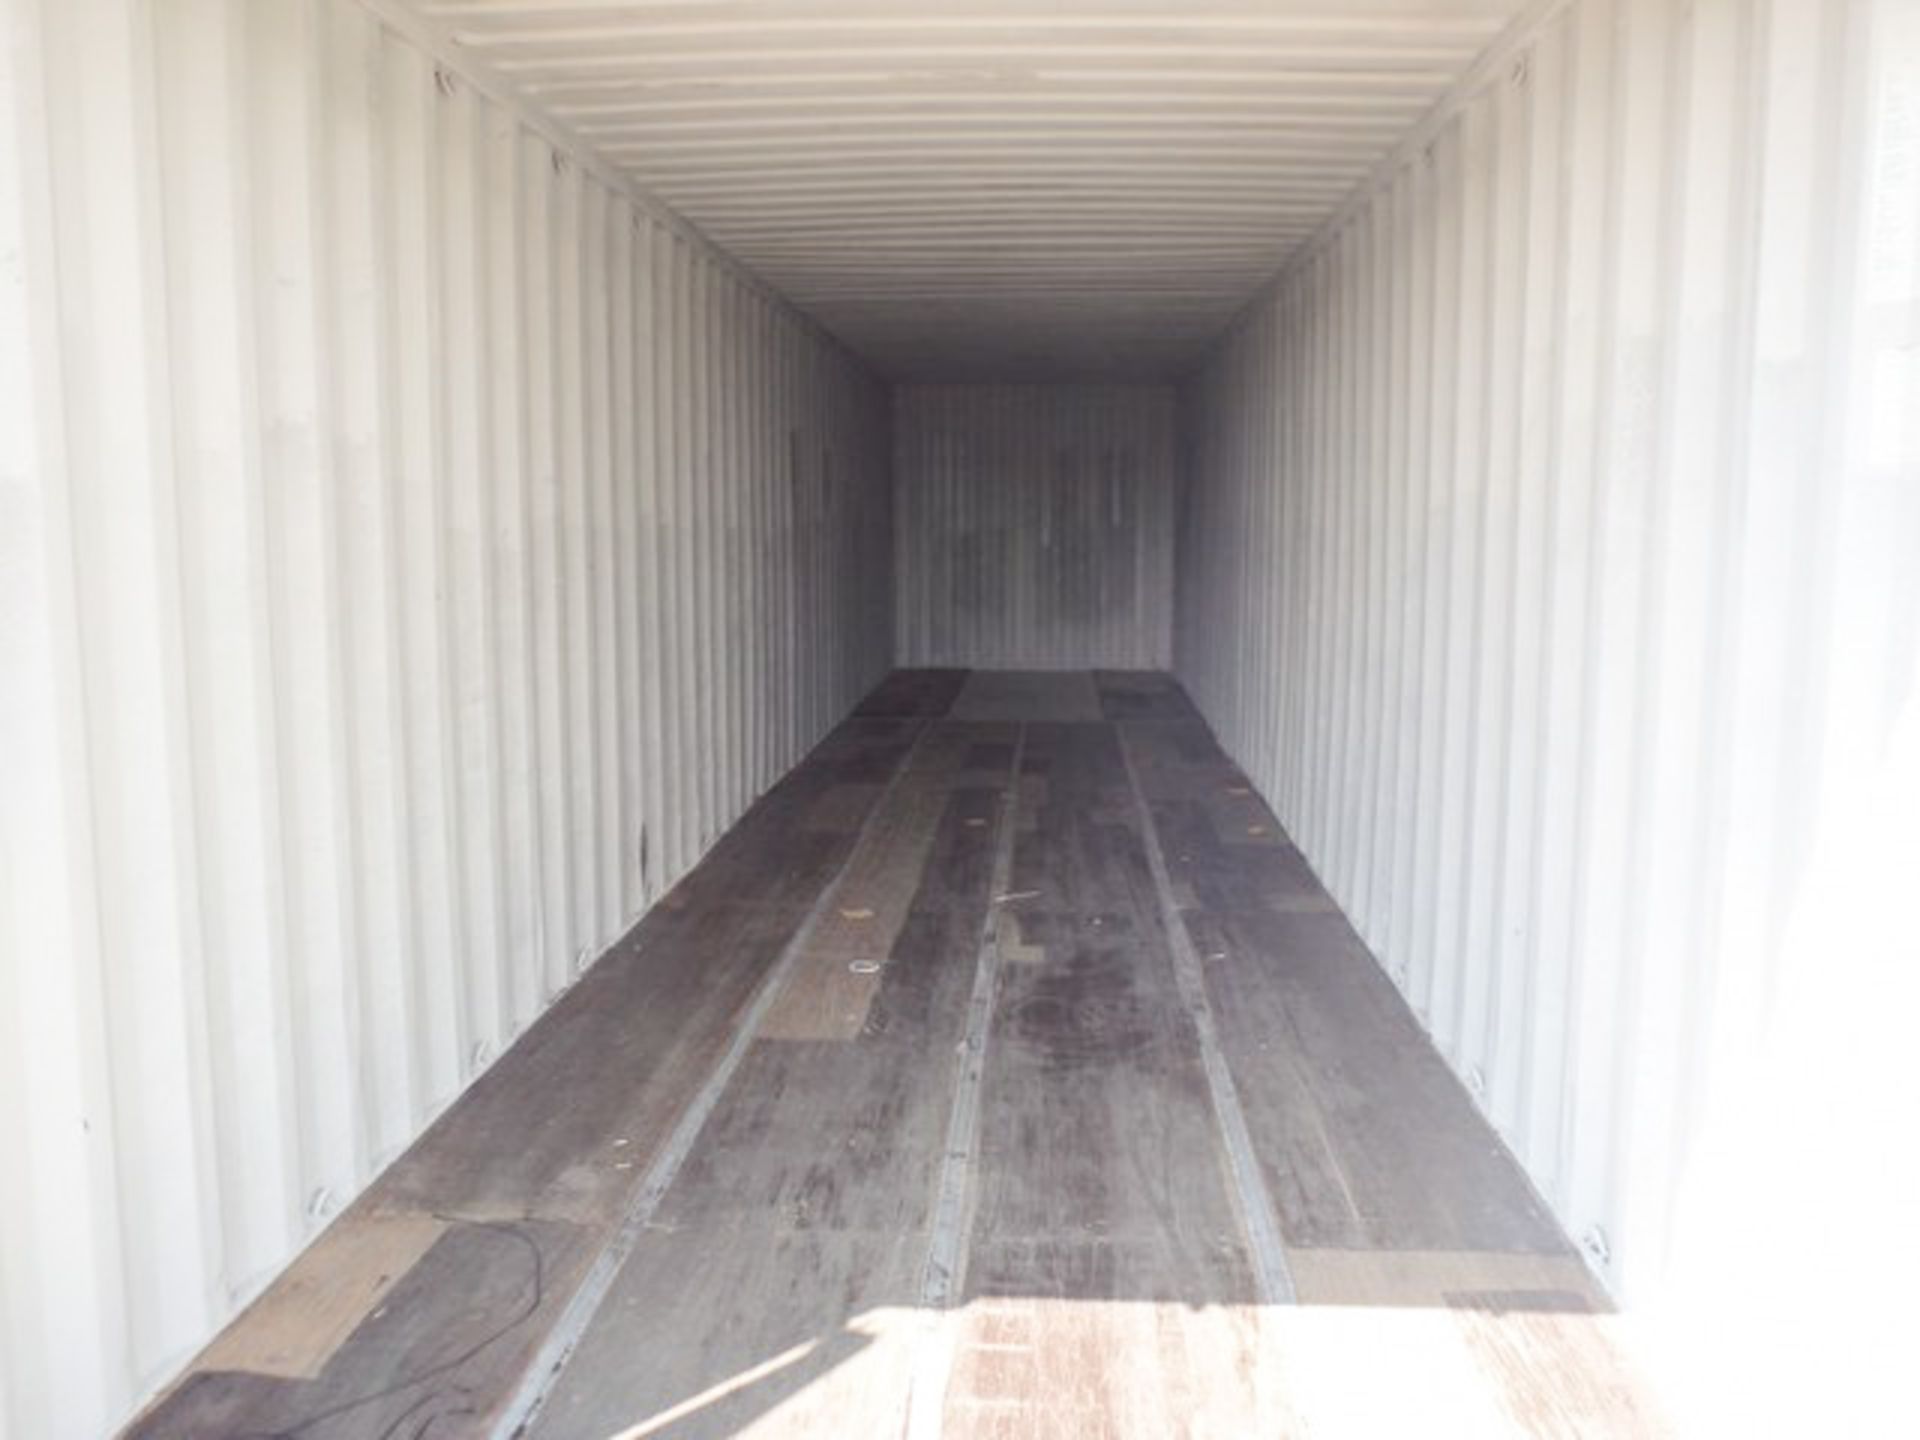 2008 USED 40 X 8 X 8 SHIPPING CONTAINER, S/N EGHU1002084 - Image 6 of 7